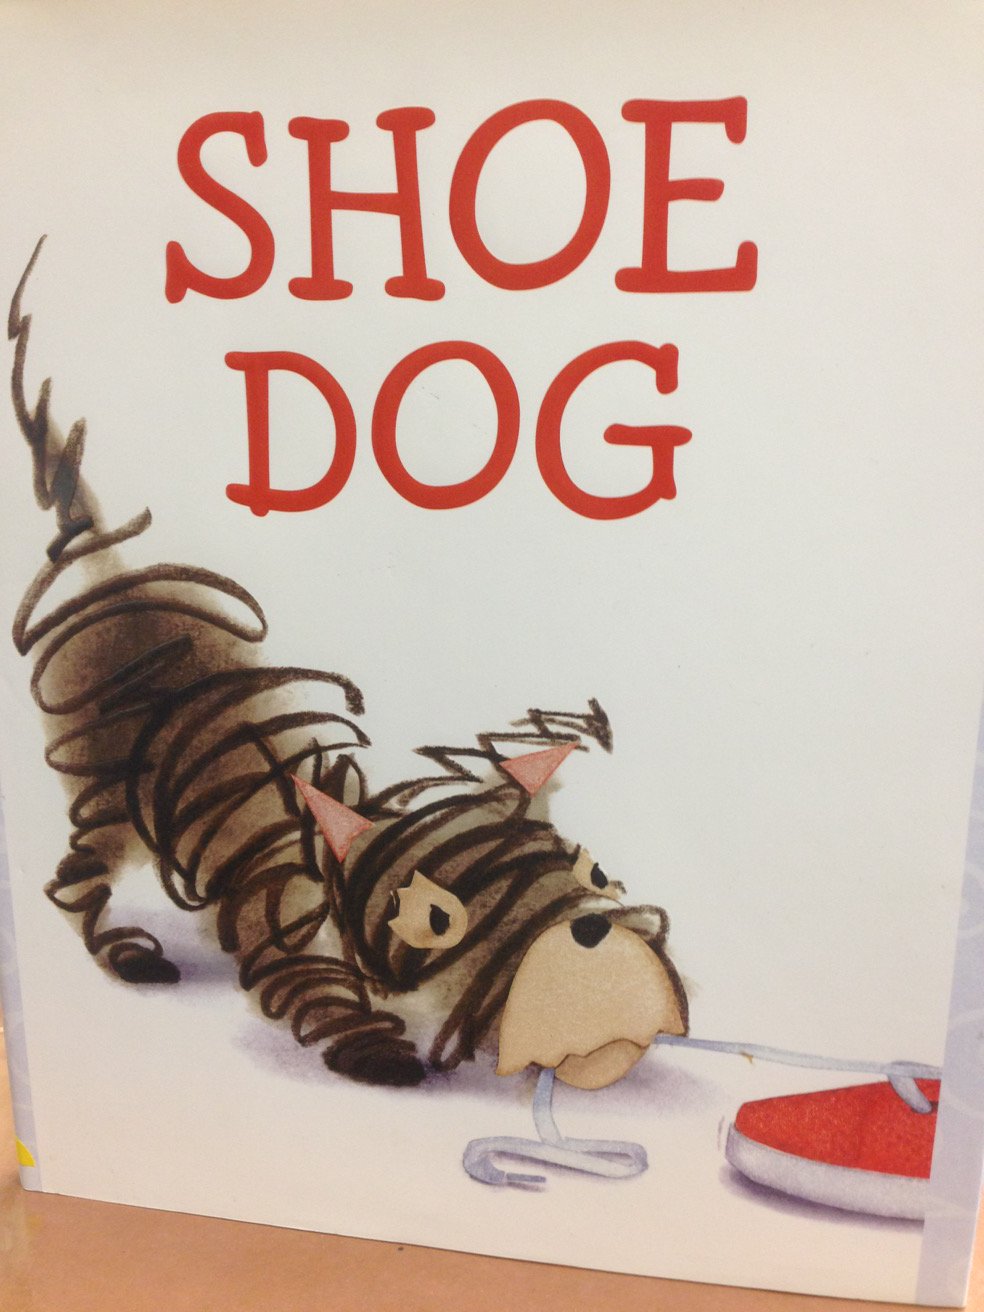 Happy Birthday Megan McDonald! Have you shared Shoe Dog with your readers? Good read-aloud! Funny & touching! 